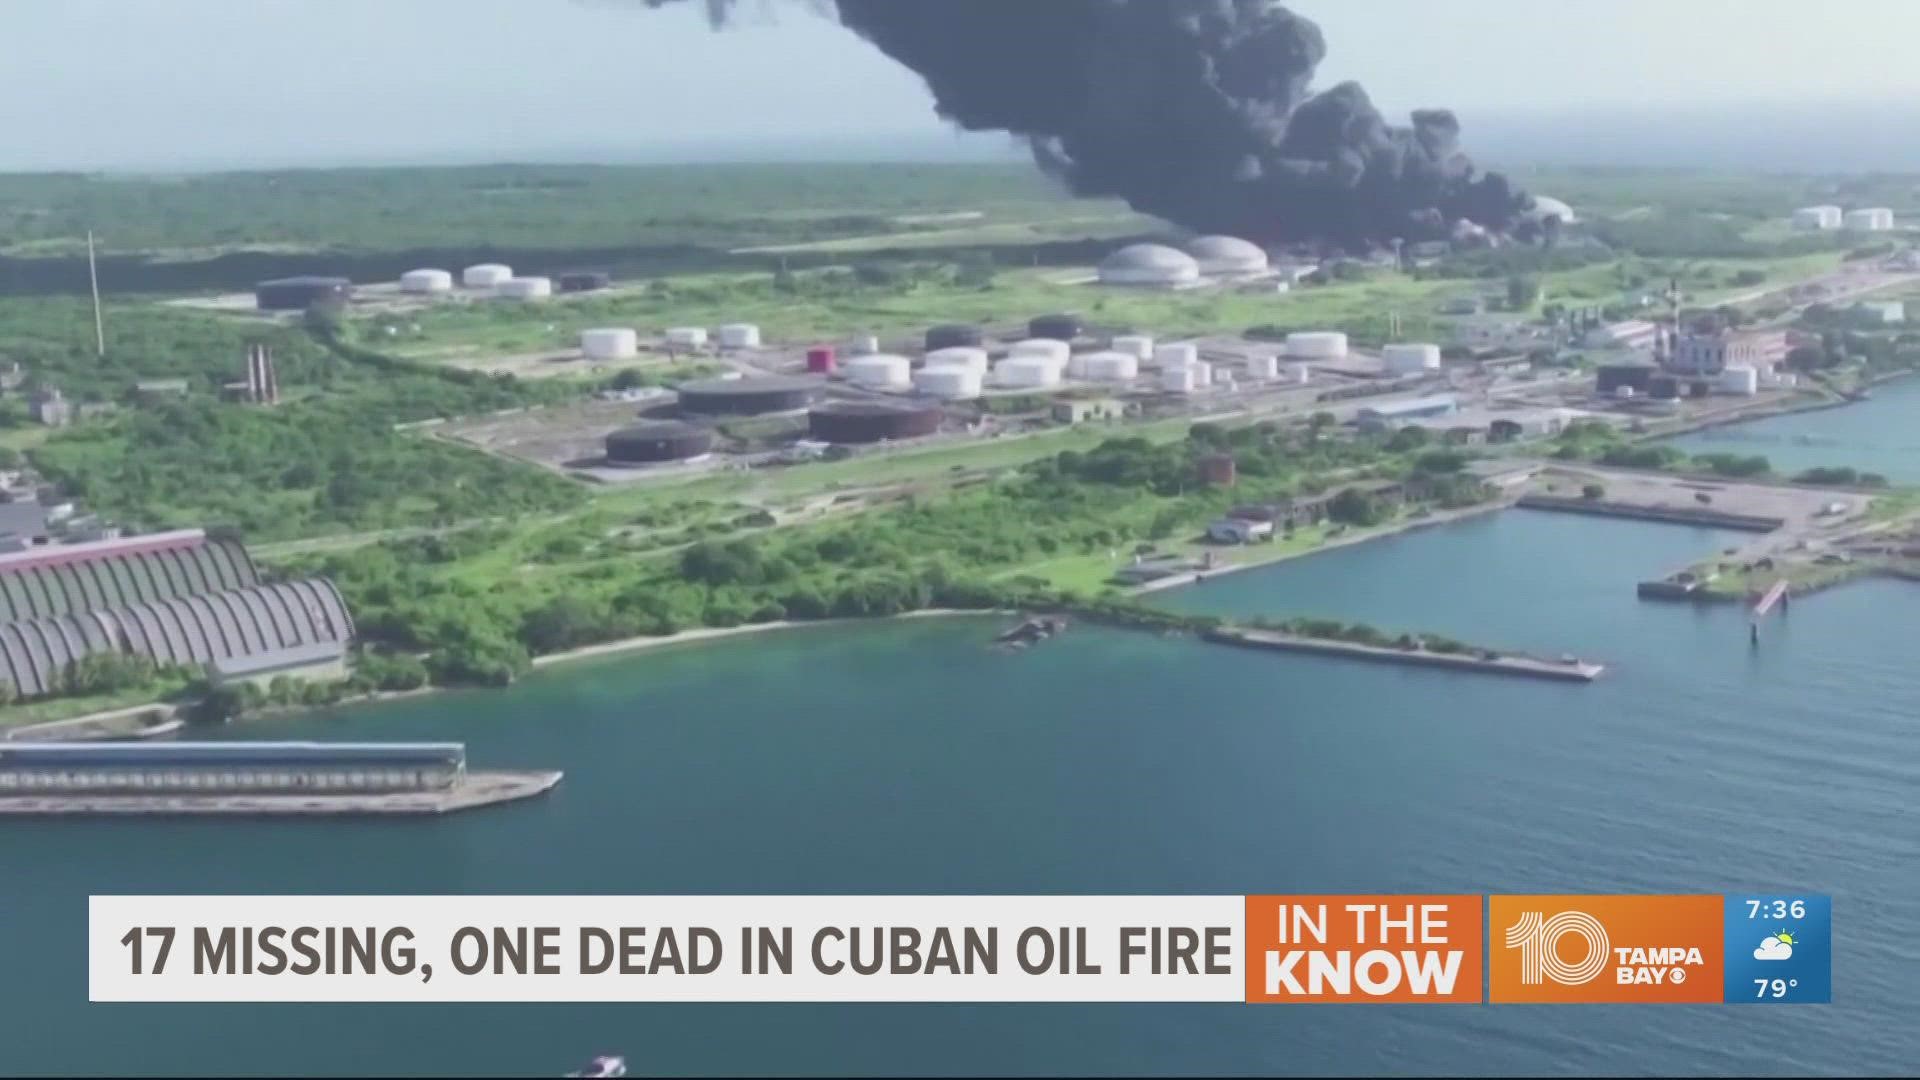 The blaze started after lightning struck an oil tank on Friday evening. A video released by the Cuban government shows the moment when a fuel storage tank erupted.